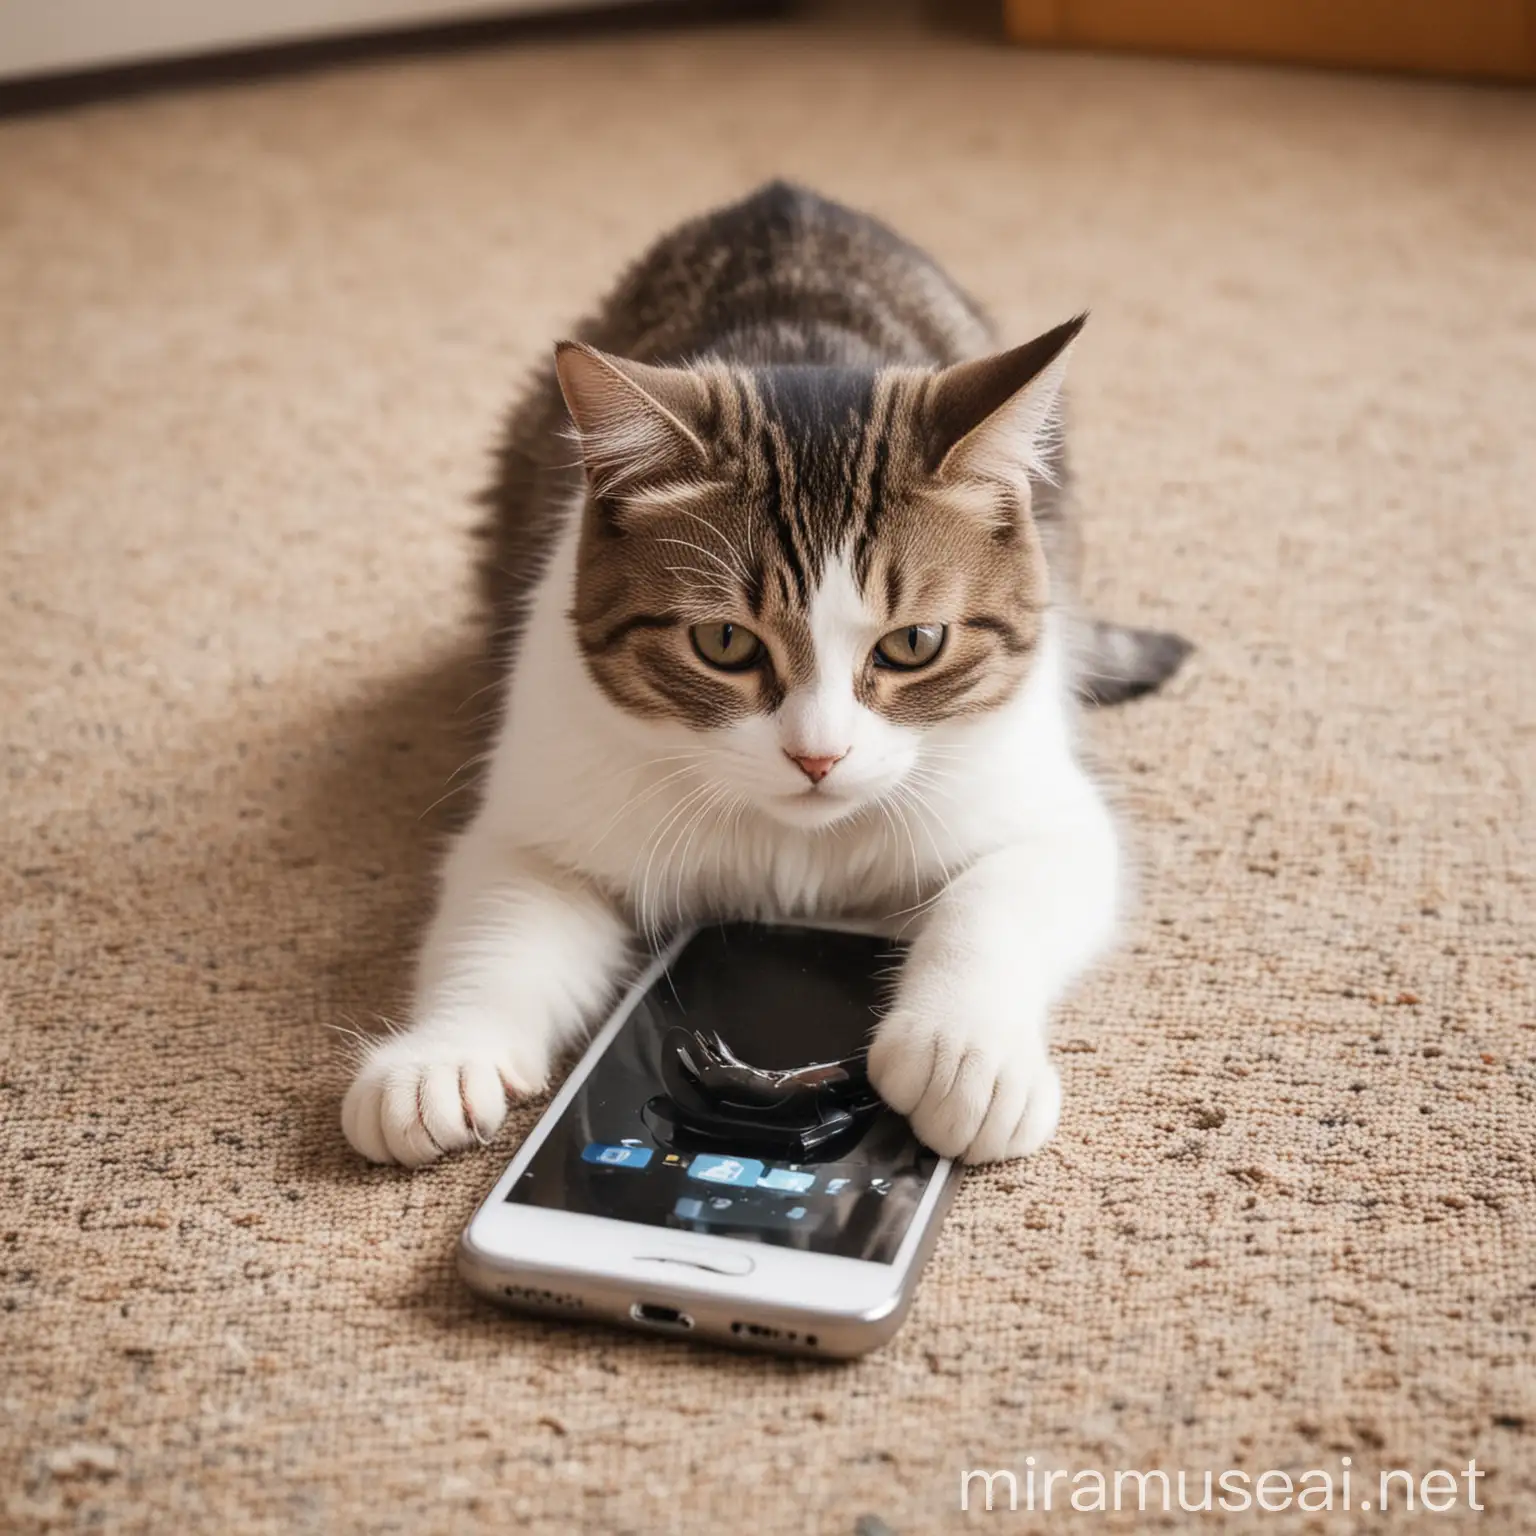 Playful Cat with Smartphone